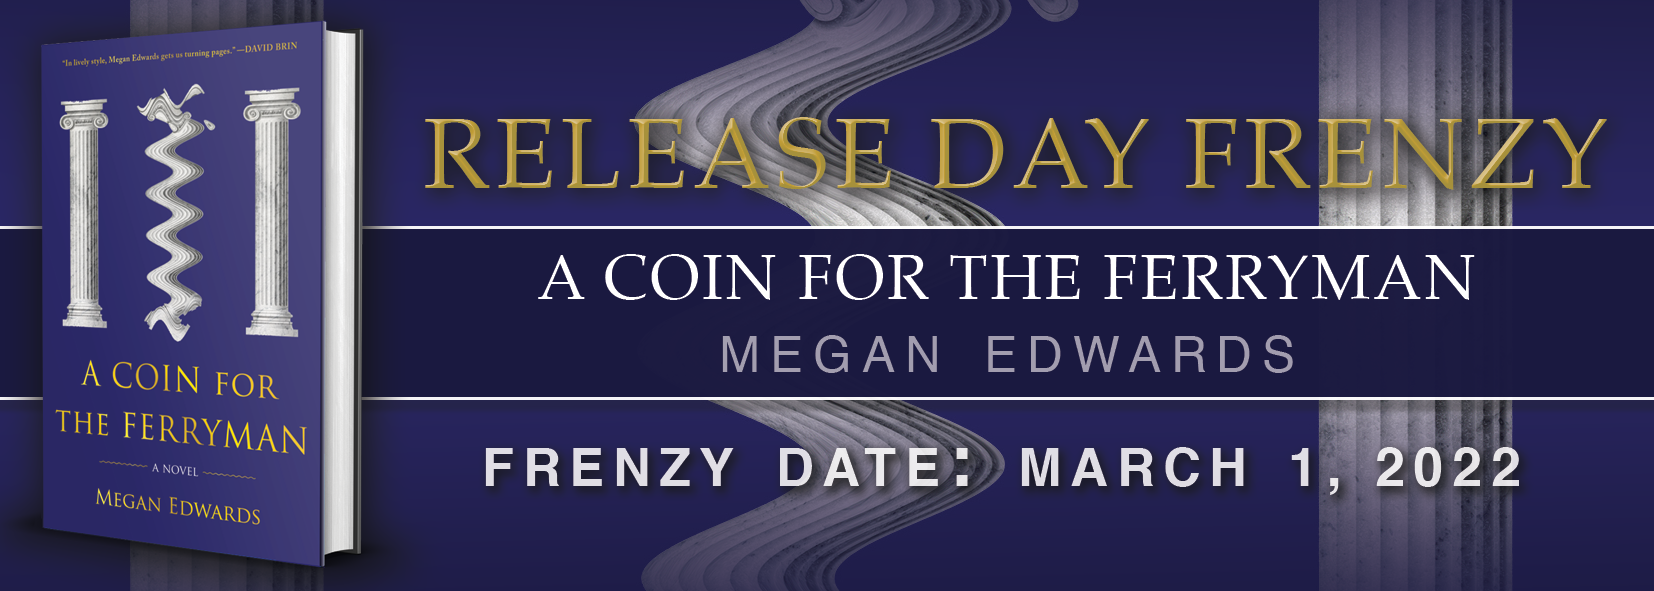 A COIN FOR THE FERRYMAN by Megan Edwards